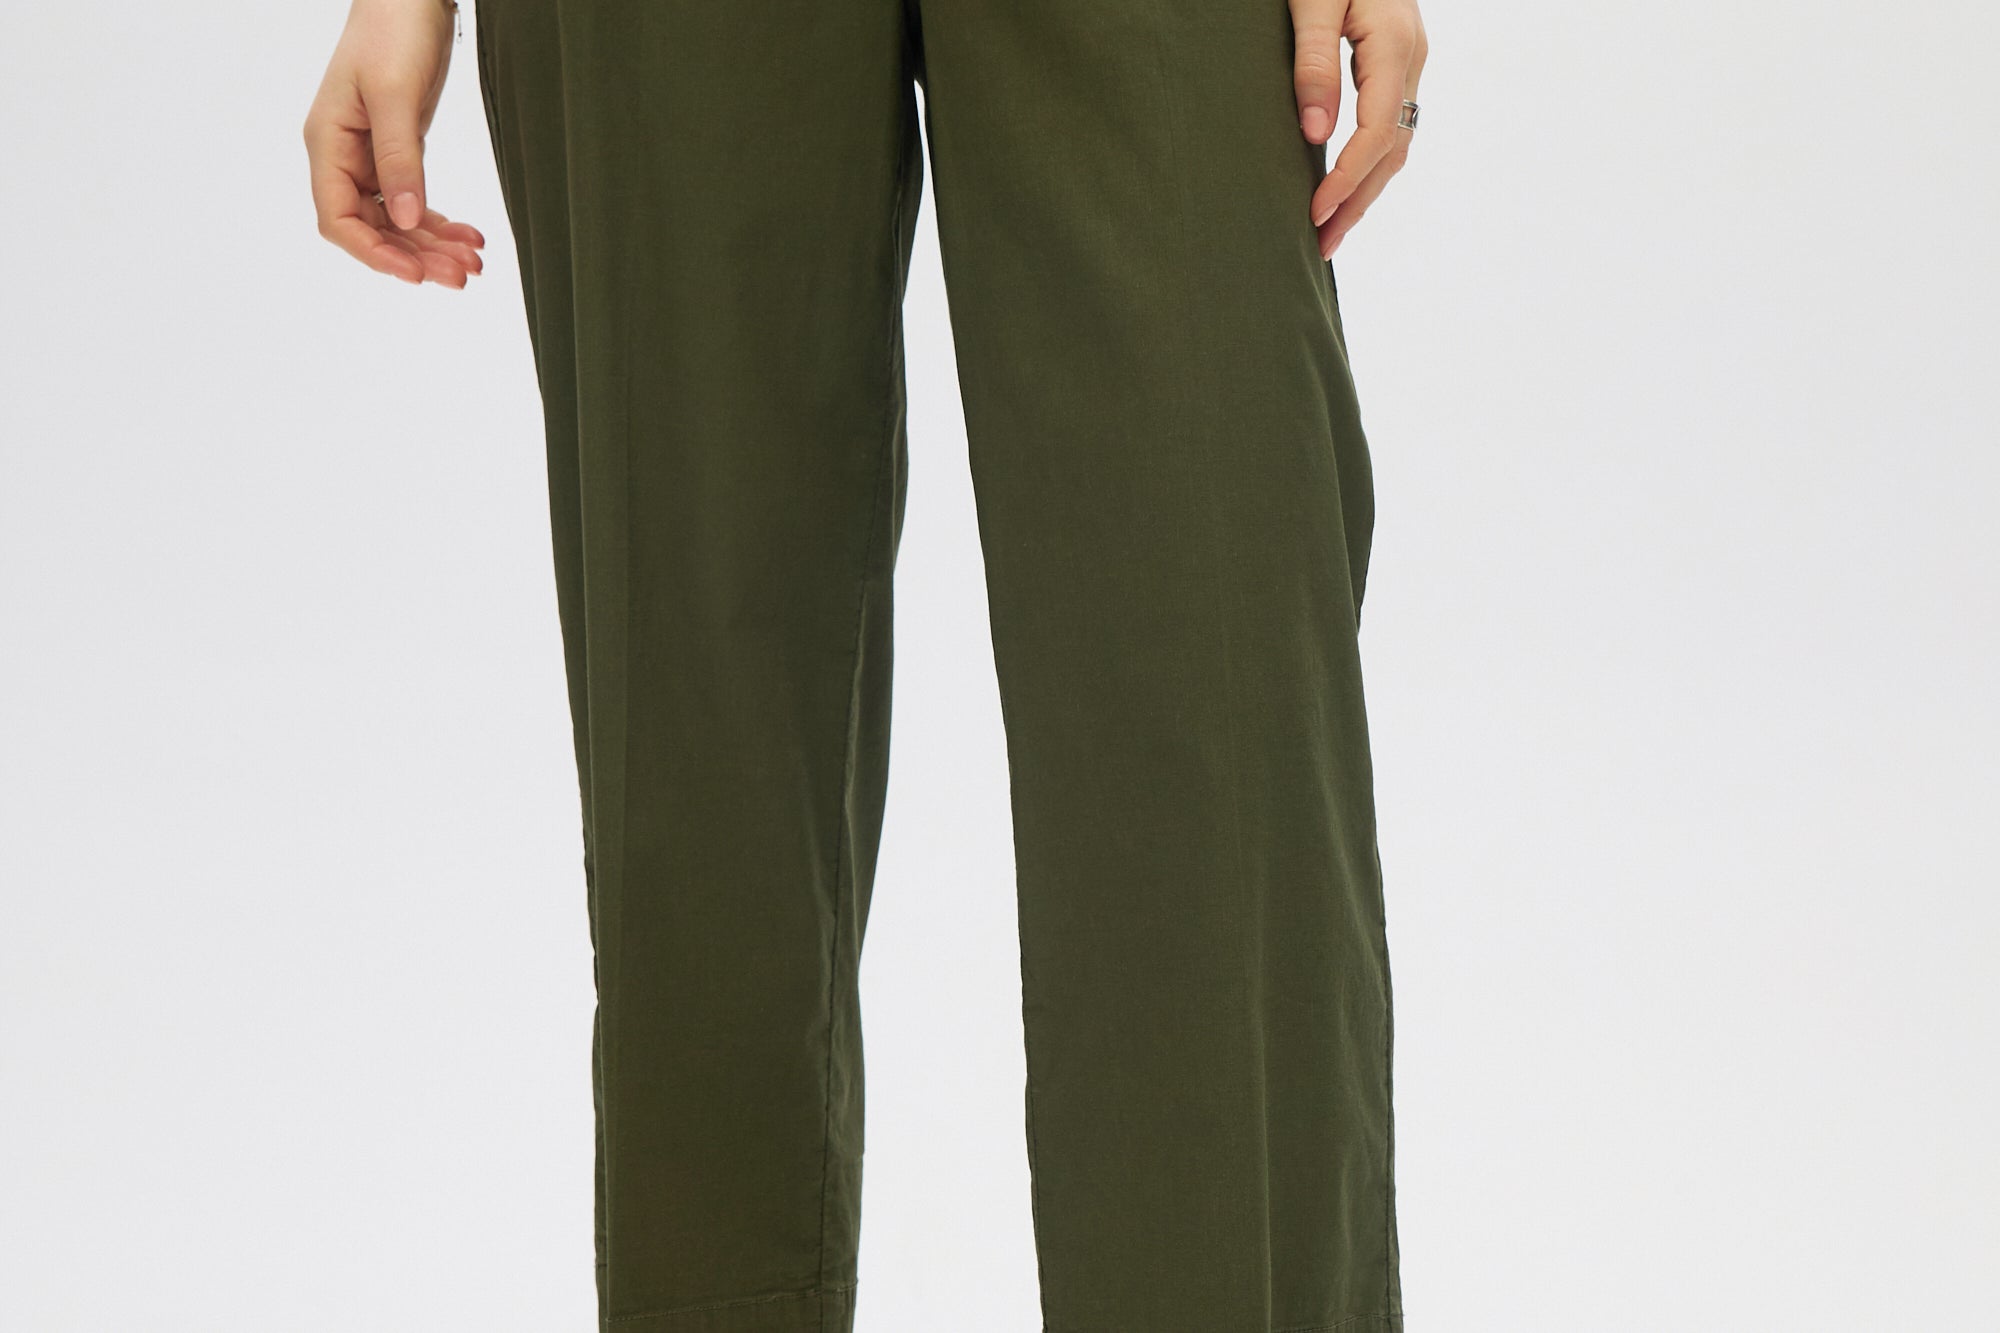 Olive Essential High-Rise Pants close up